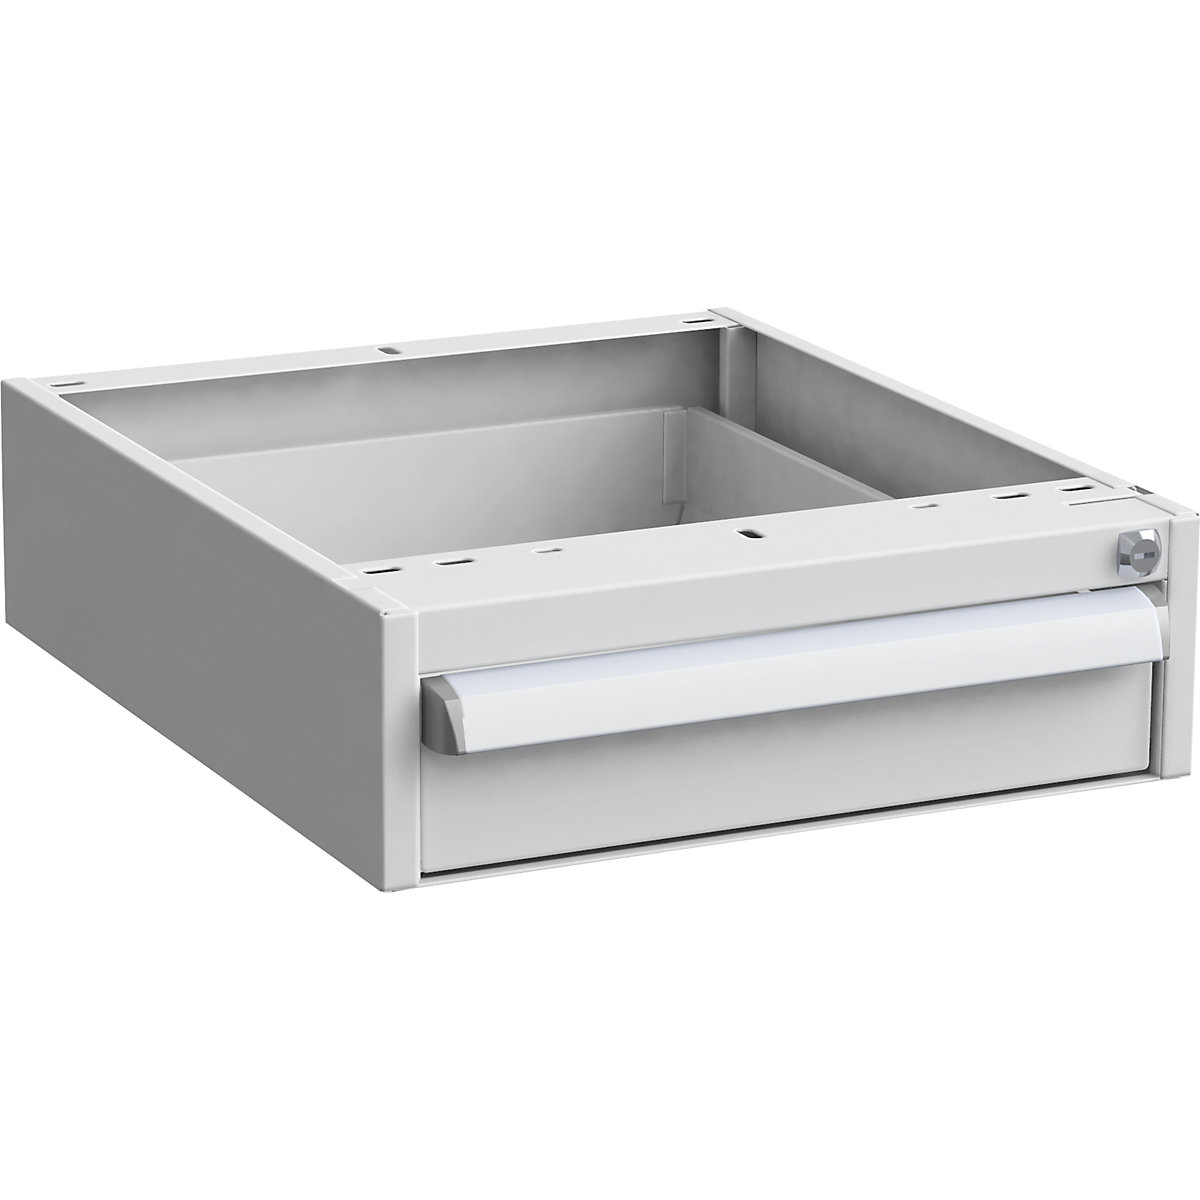 Suspended drawer unit – Treston, electrically conductive (ESD), 1 drawer height 100 mm-1